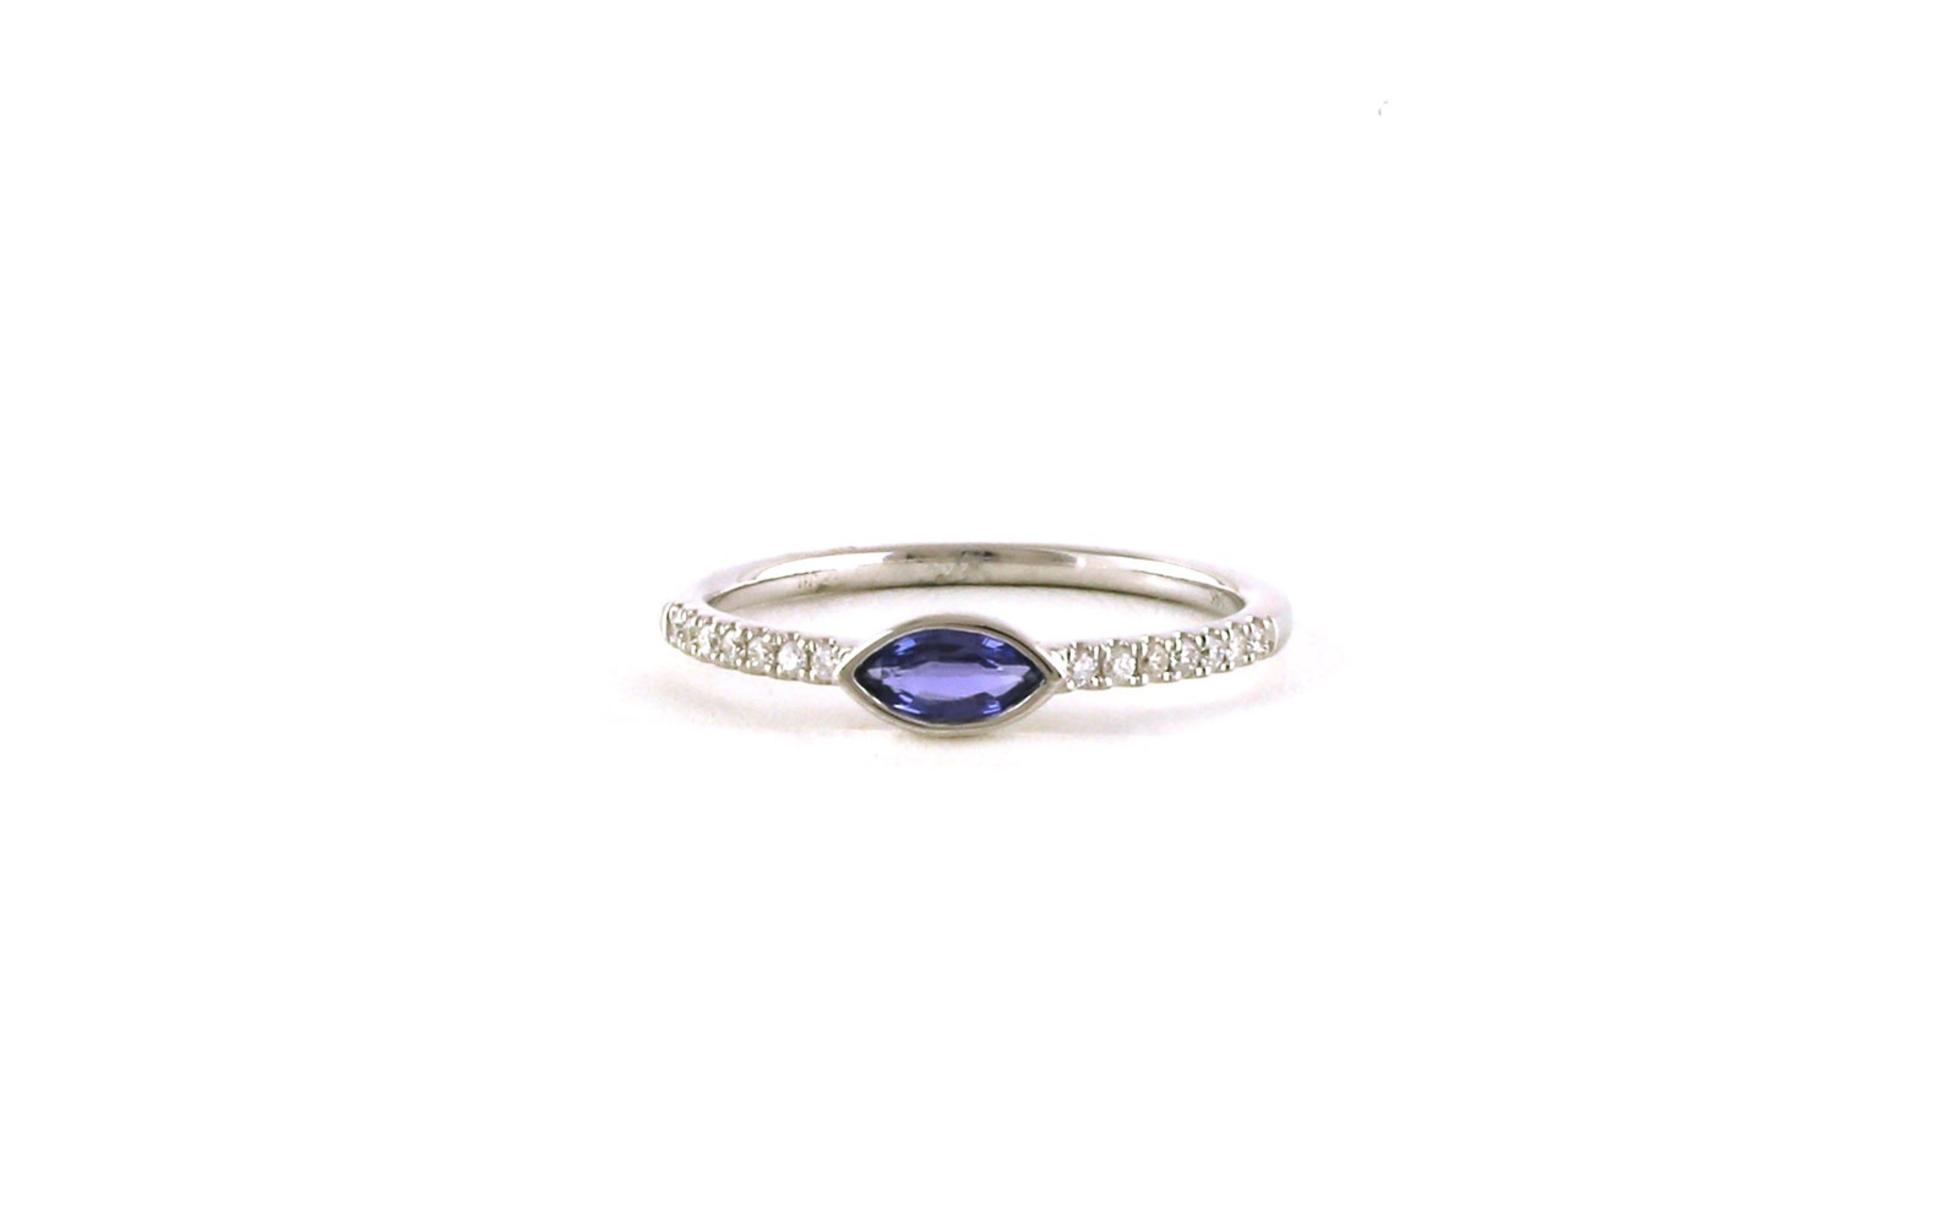 East-West Bezel-set Marquise-cut Montana Yogo Sapphire and Diamond Ring in White Gold (0.38cts TWT)